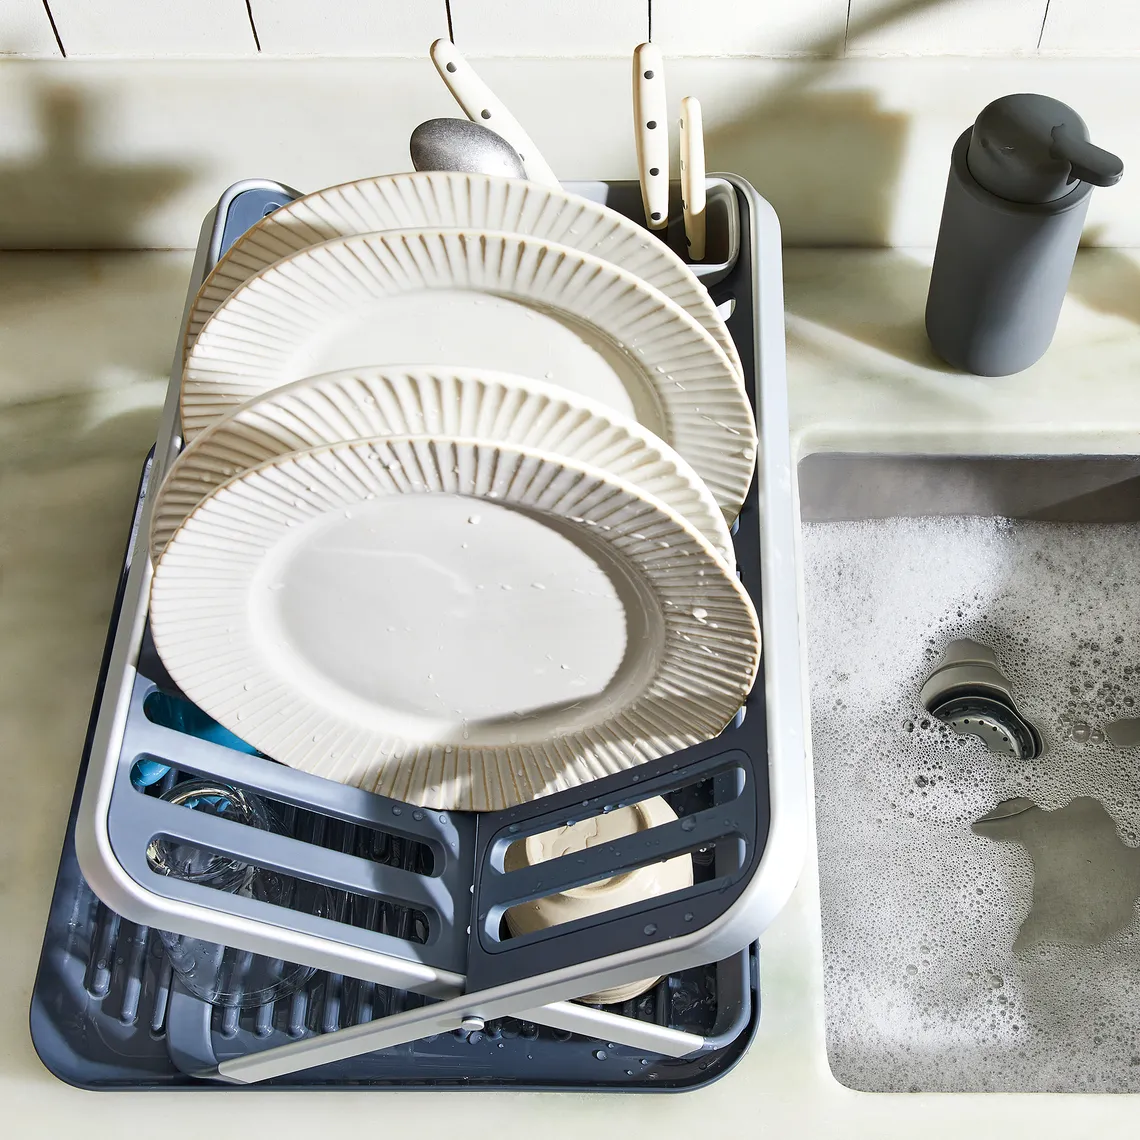 Dry Your Dishes with Ease with the OXO Over the Sink Aluminum Disk